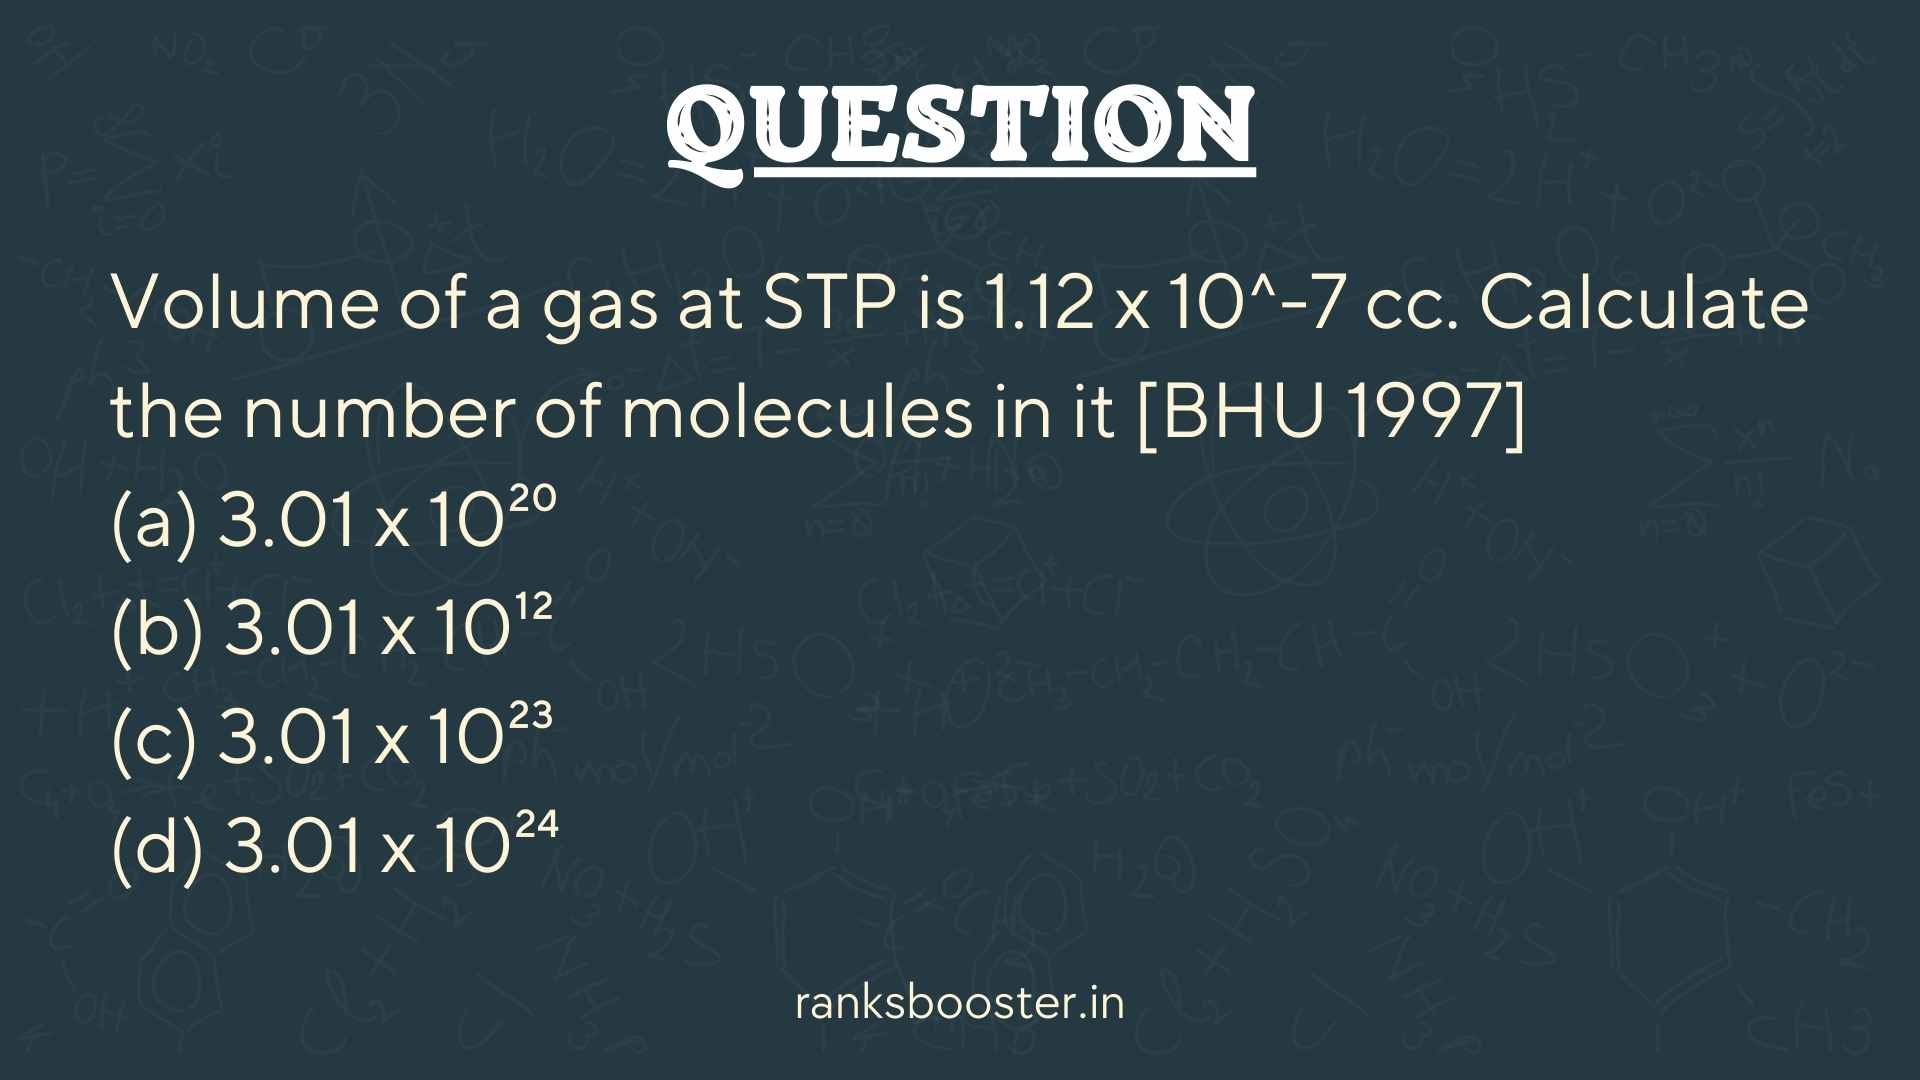 Volume of a gas at STP is 1.12 x 10^-7 cc. Calculate the number of molecules in it [BHU 1997] (a) 3.01 x 10²⁰ (b) 3.01 x 10¹² (c) 3.01 x 10²³ (d) 3.01 x 10²⁴